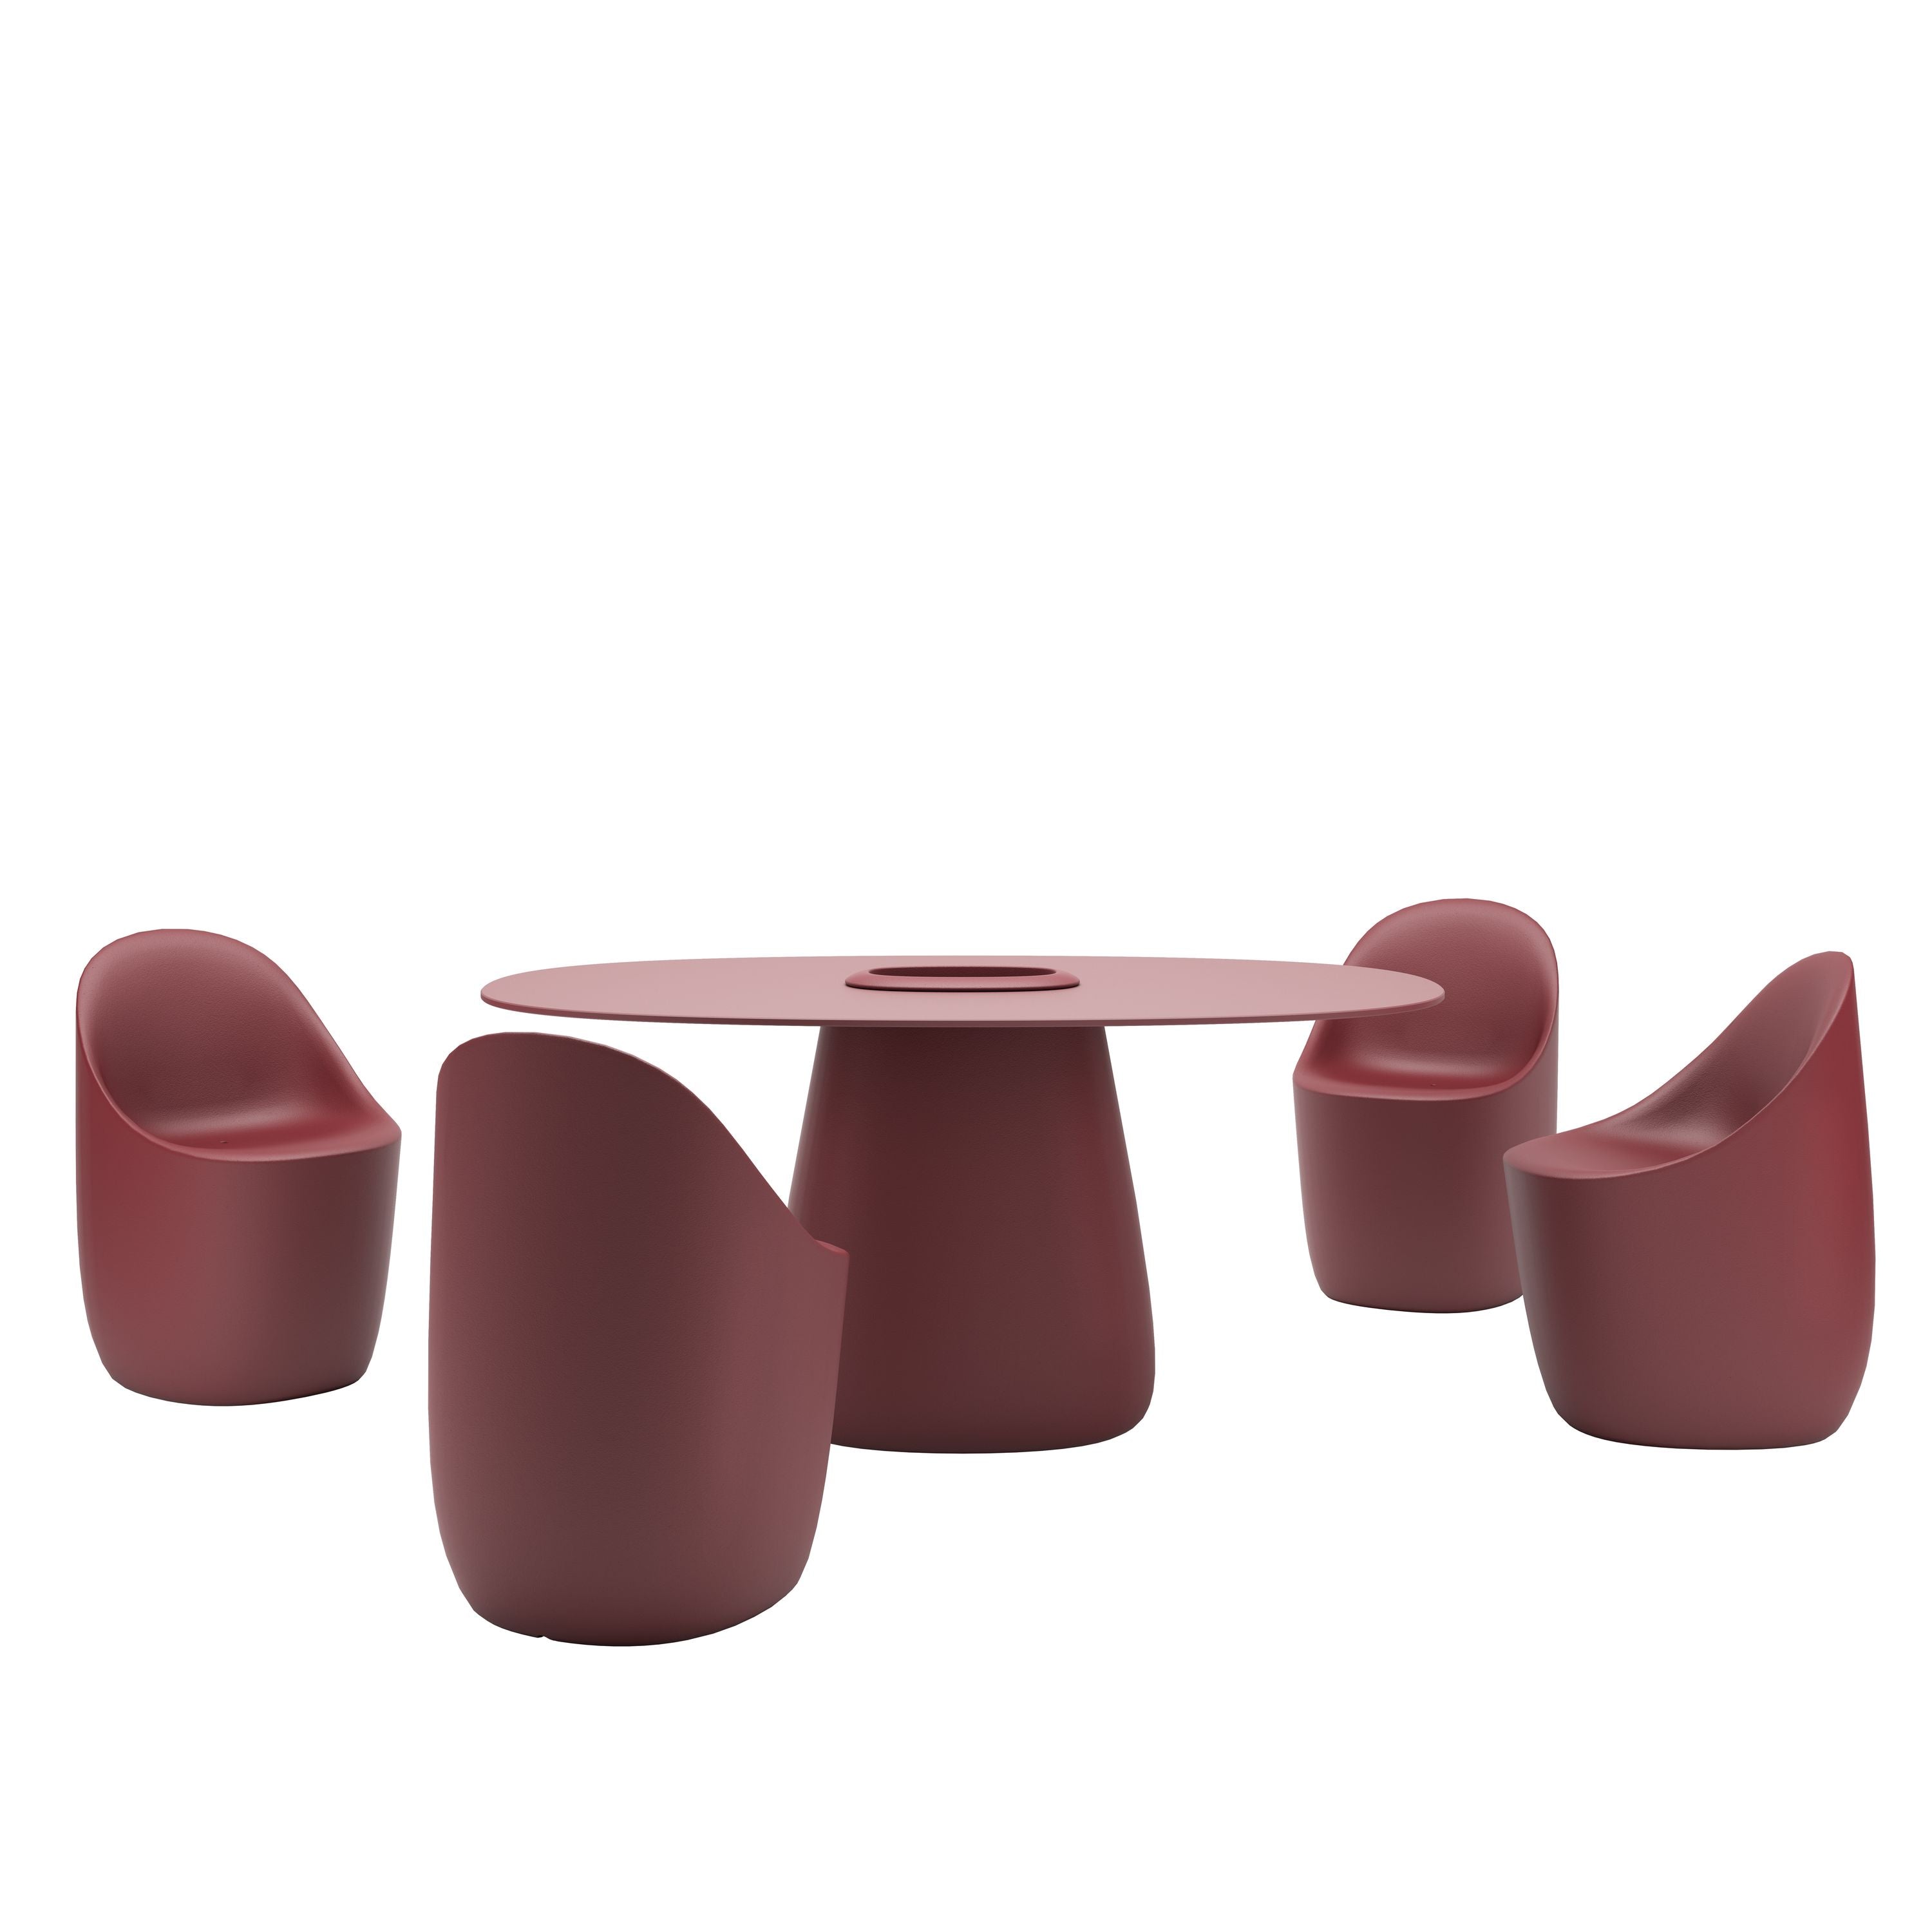 Qeeboo Cobble Chair, Indian Red